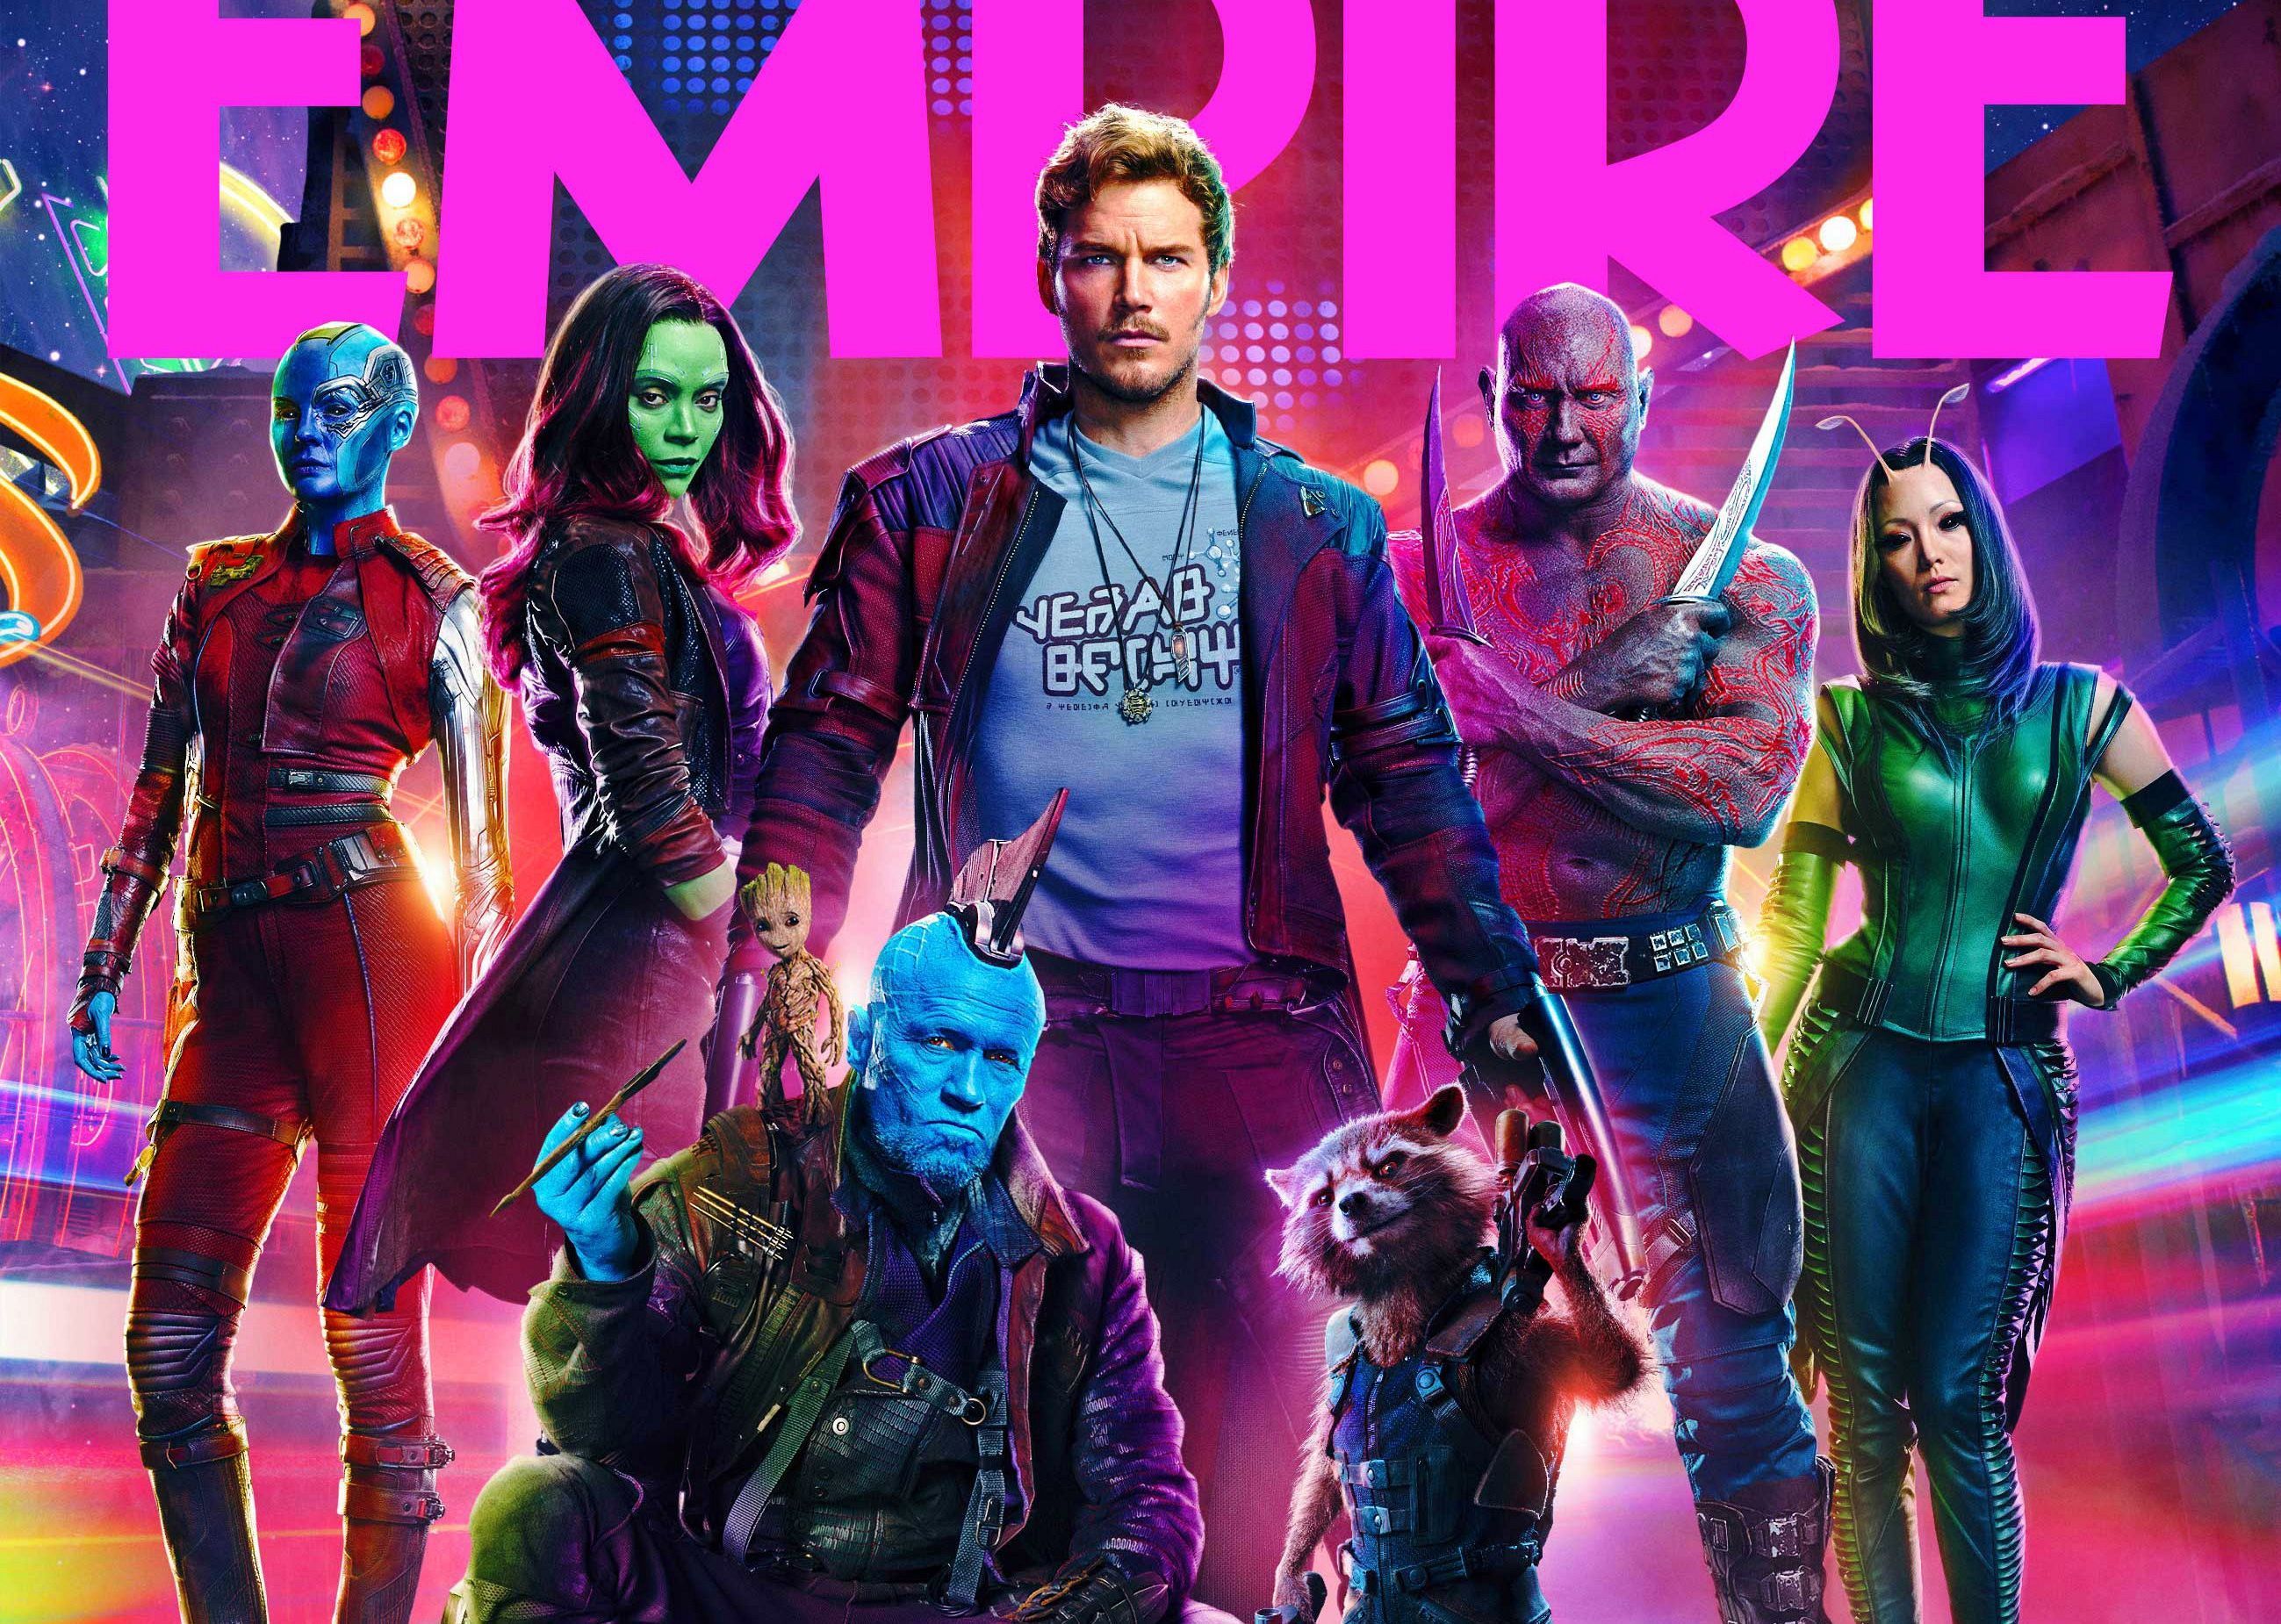 WHICH GUARDIANS OF THE GALAXY CHARACTER ARE YOU?